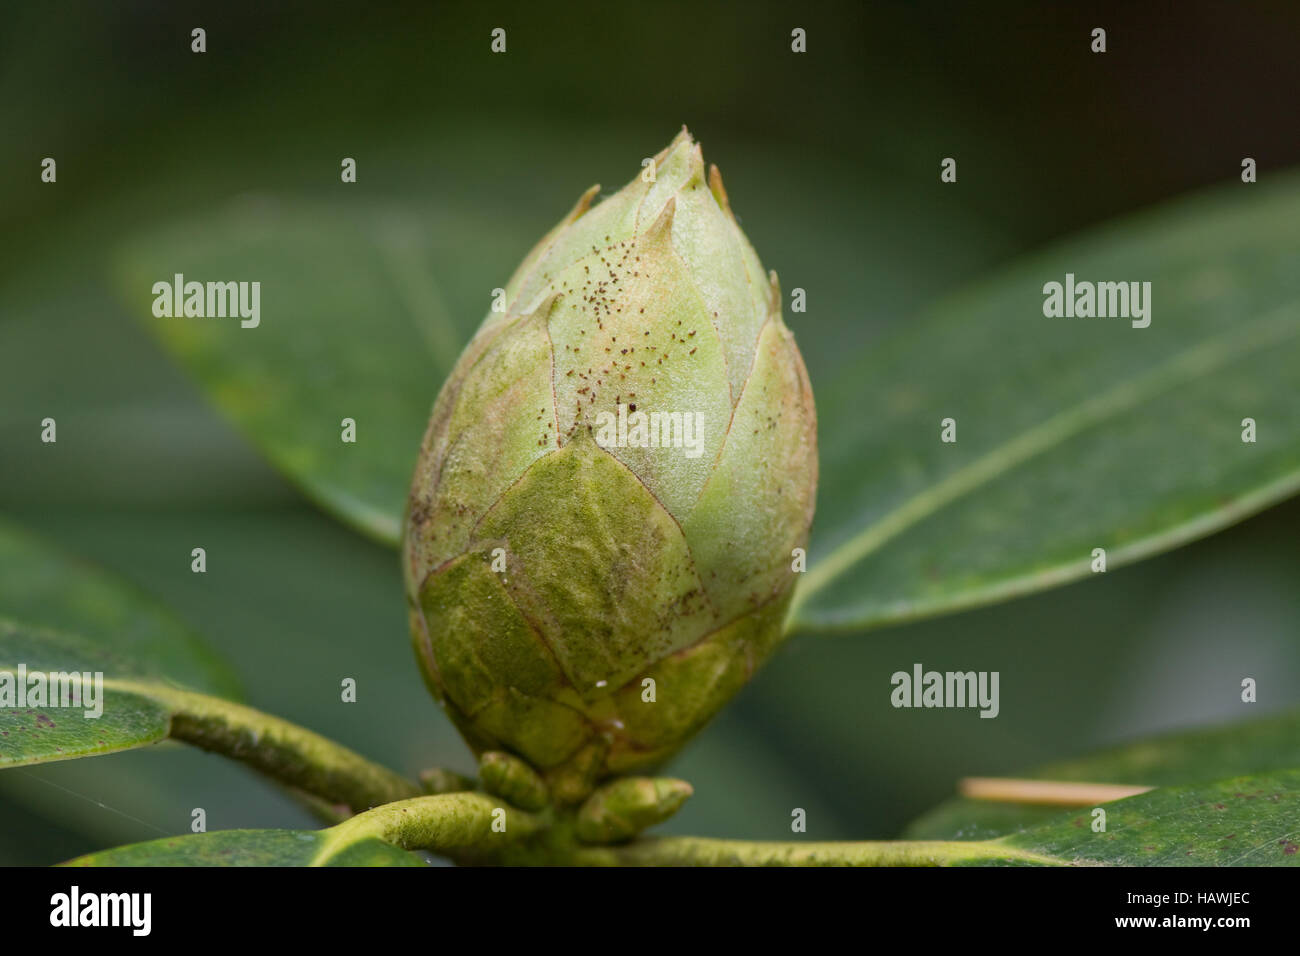 Rhododendron bud Foto Stock